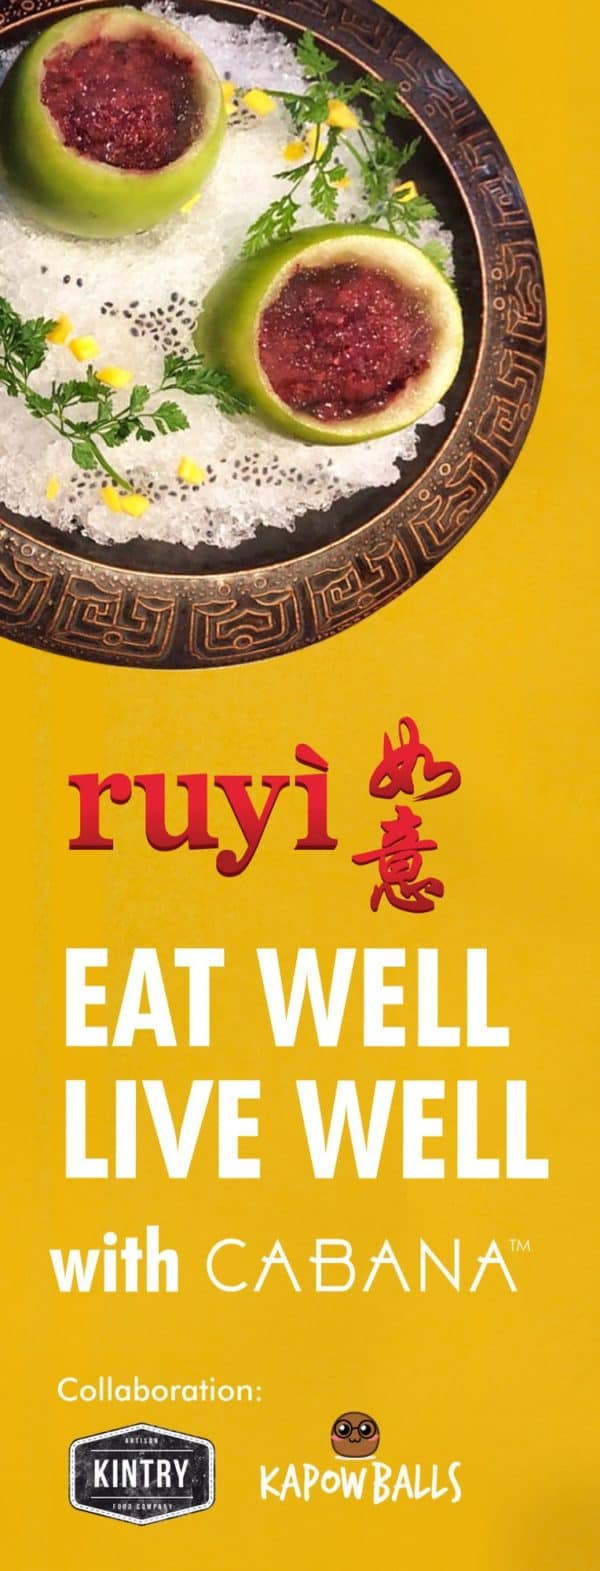 Eat Well Live Well with CABANA at Ruyi 8